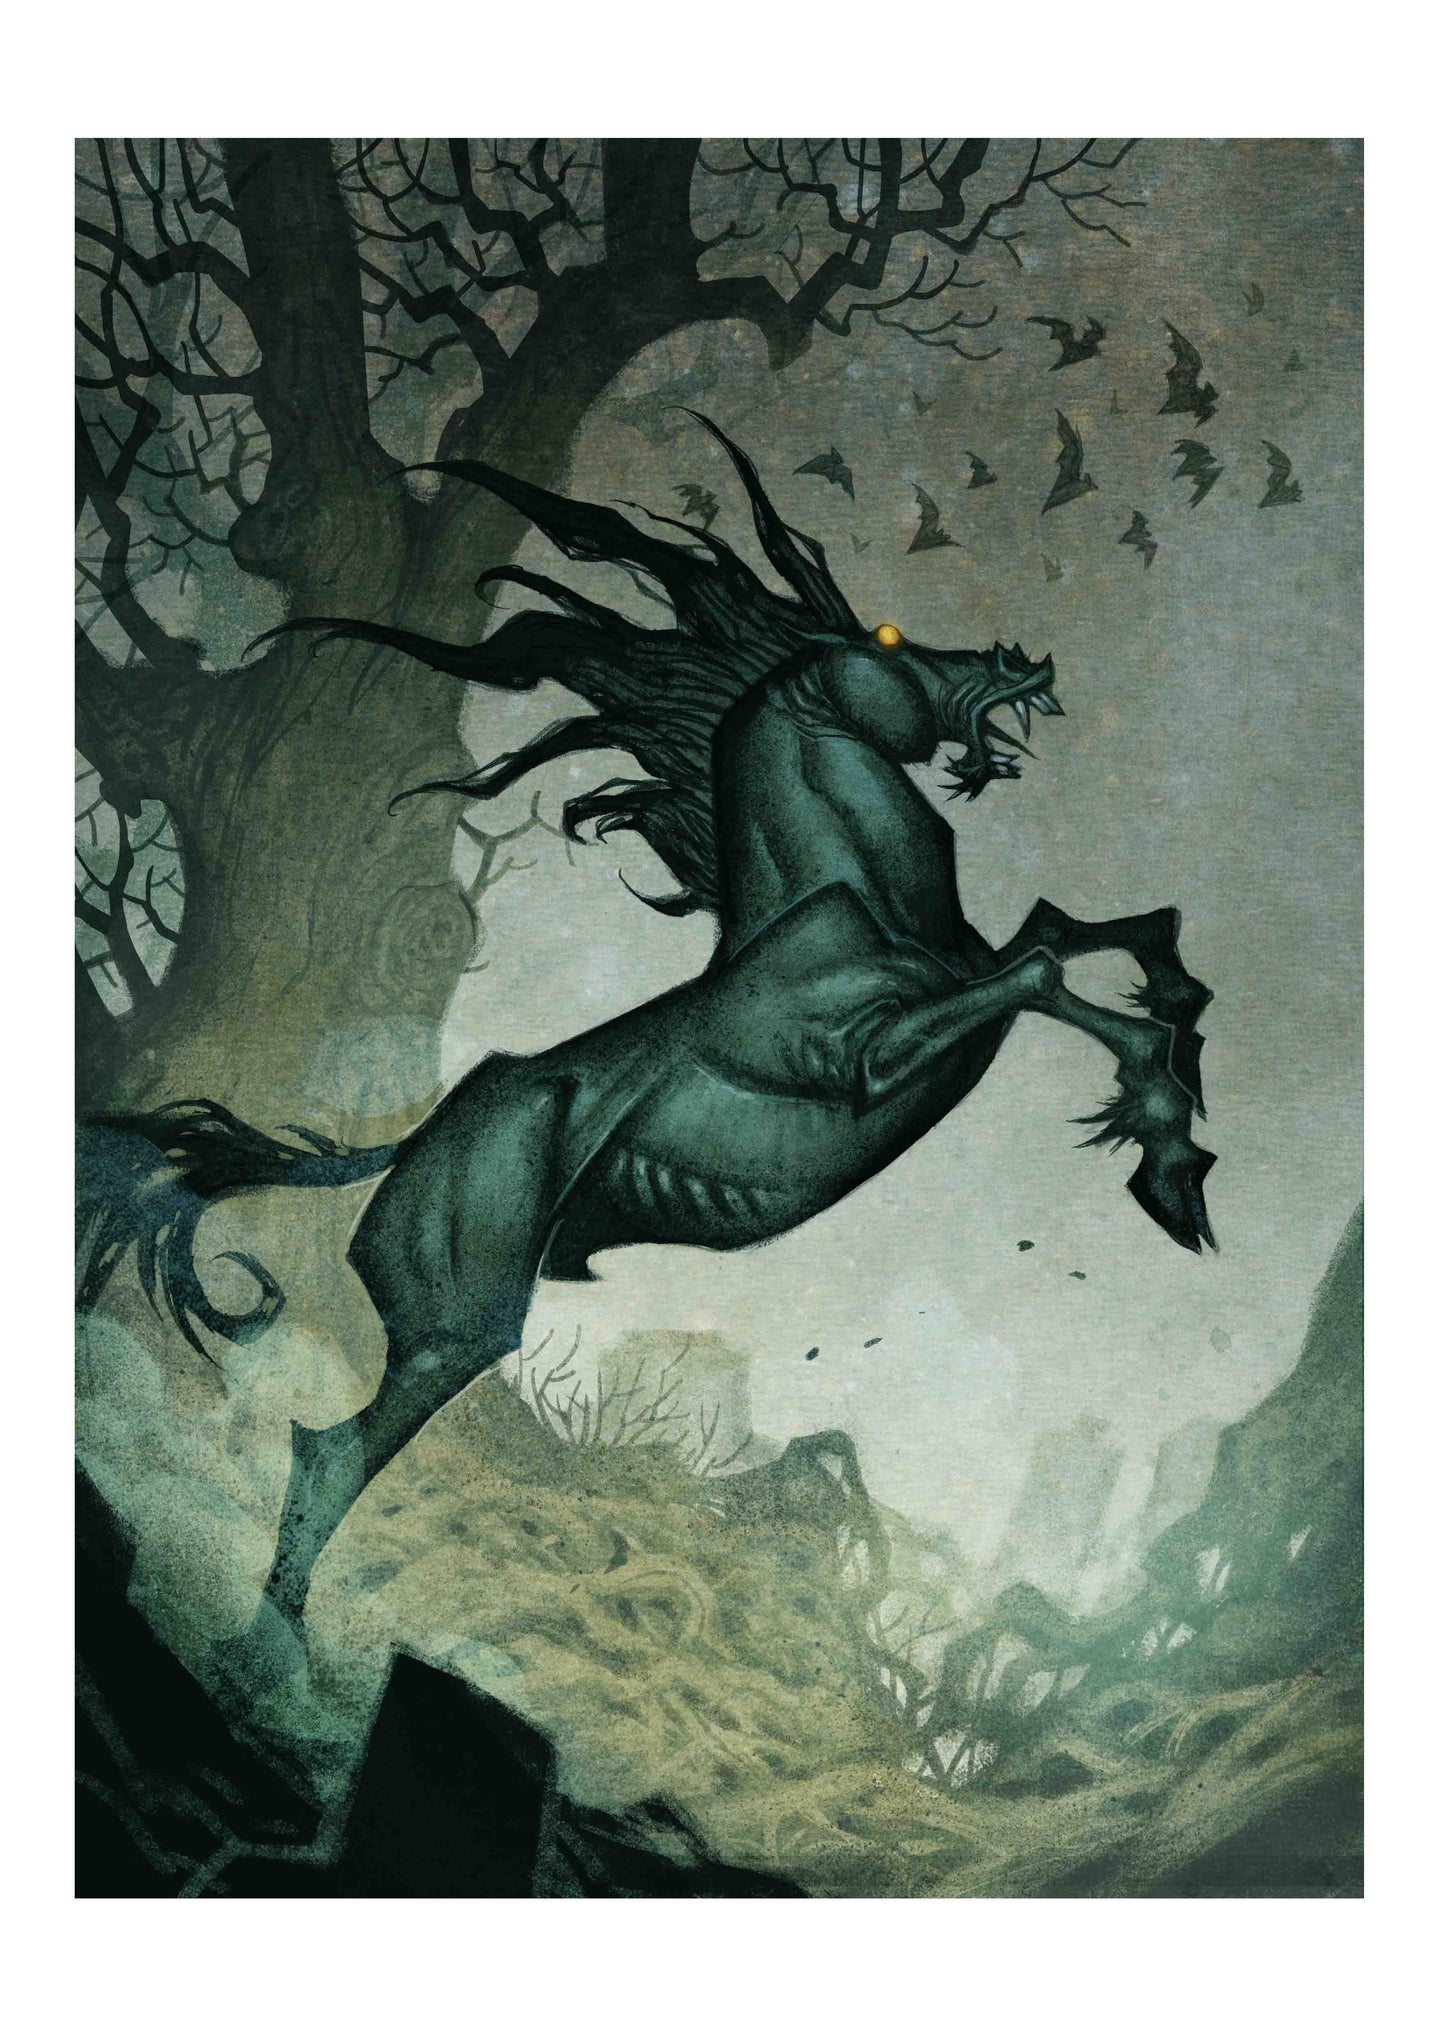 HELL STEED - SIGNED ART PRINT